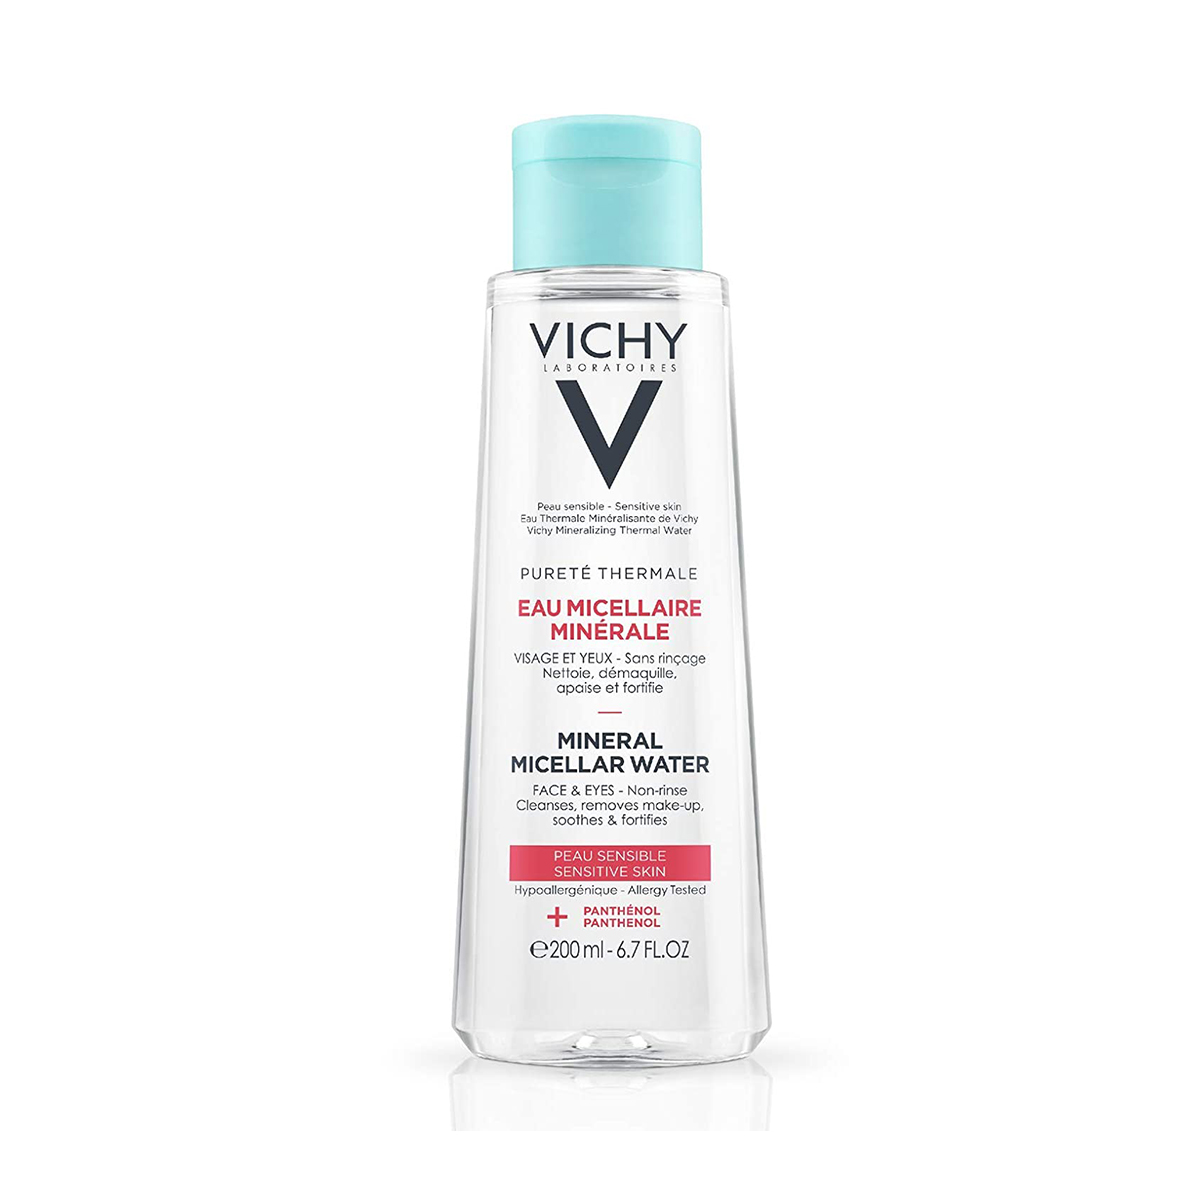 Vichy Pureté Thermale Mineral Micellar Cleansing Water